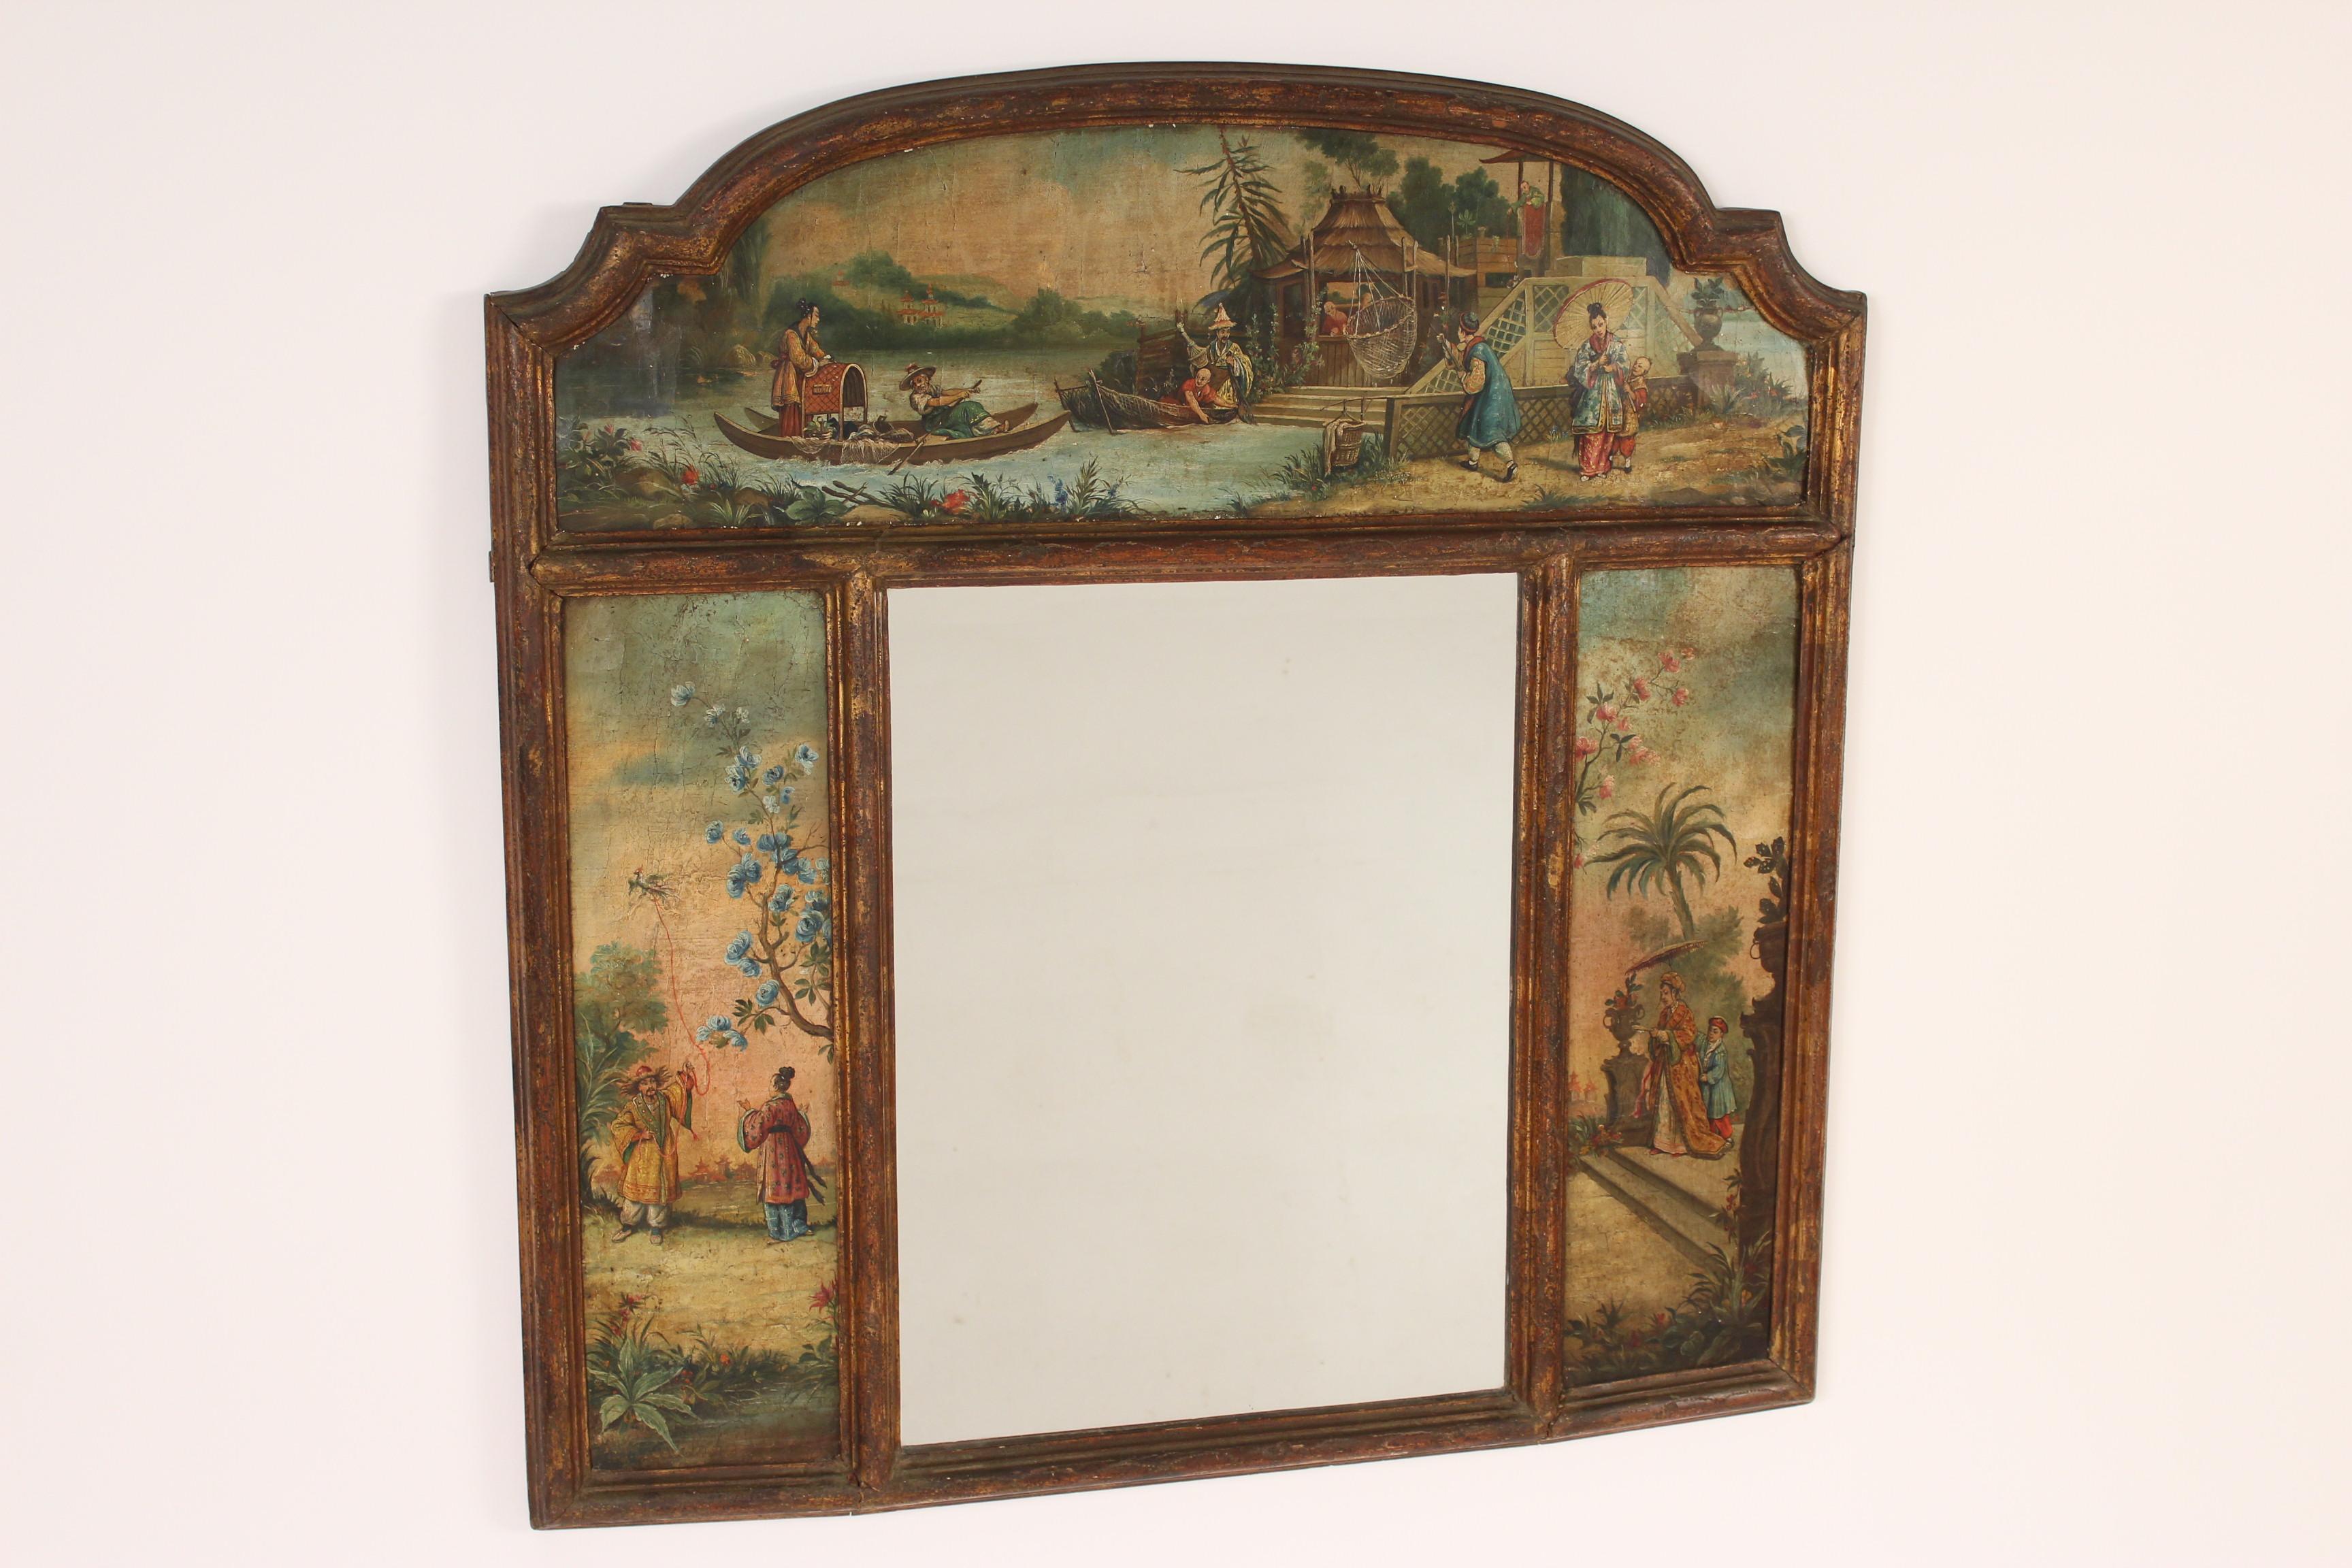 Italian giltwood and painted mirror with chinoiserie painted panels, 19th century. The painted panels are on paper. The gilding has darkened with age.